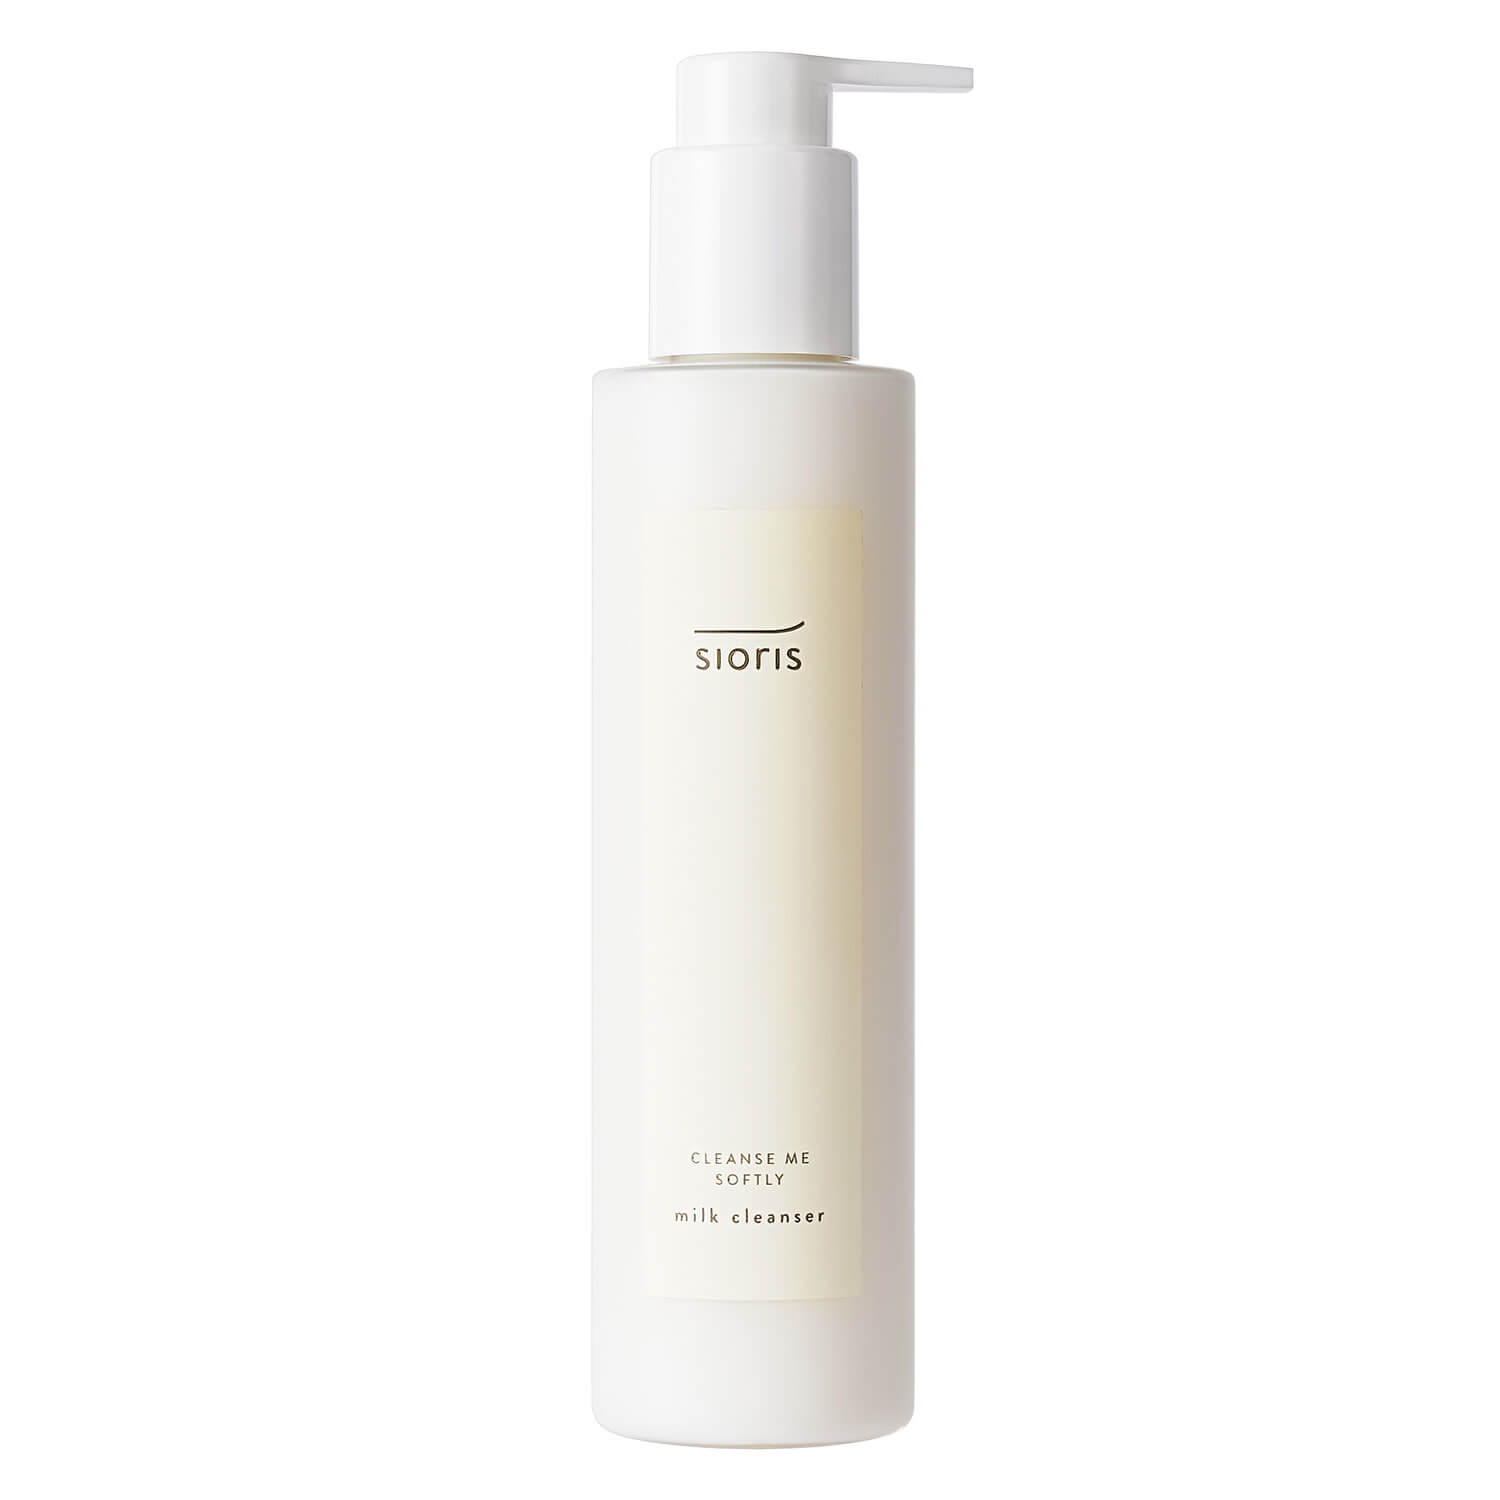 Product image from sioris - CLEANSE ME SOFTLY milk cleanser